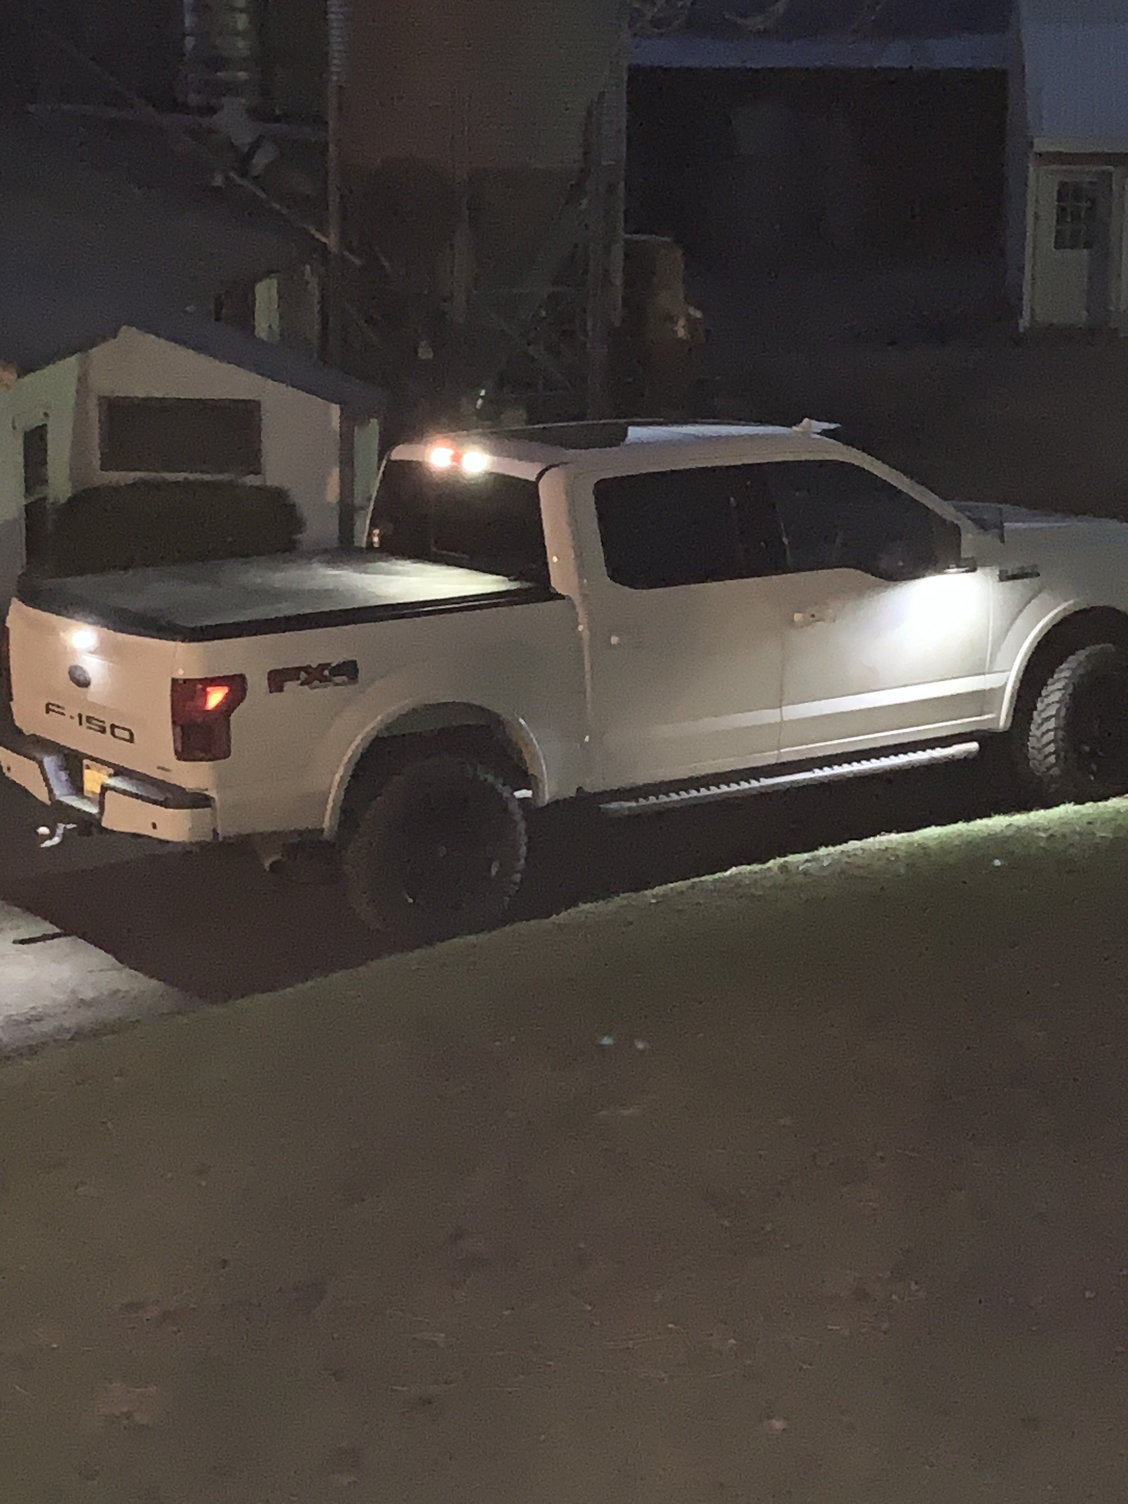 2018 - Exterior lights flickering on and off - Ford F150 Forum - Community  of Ford Truck Fans